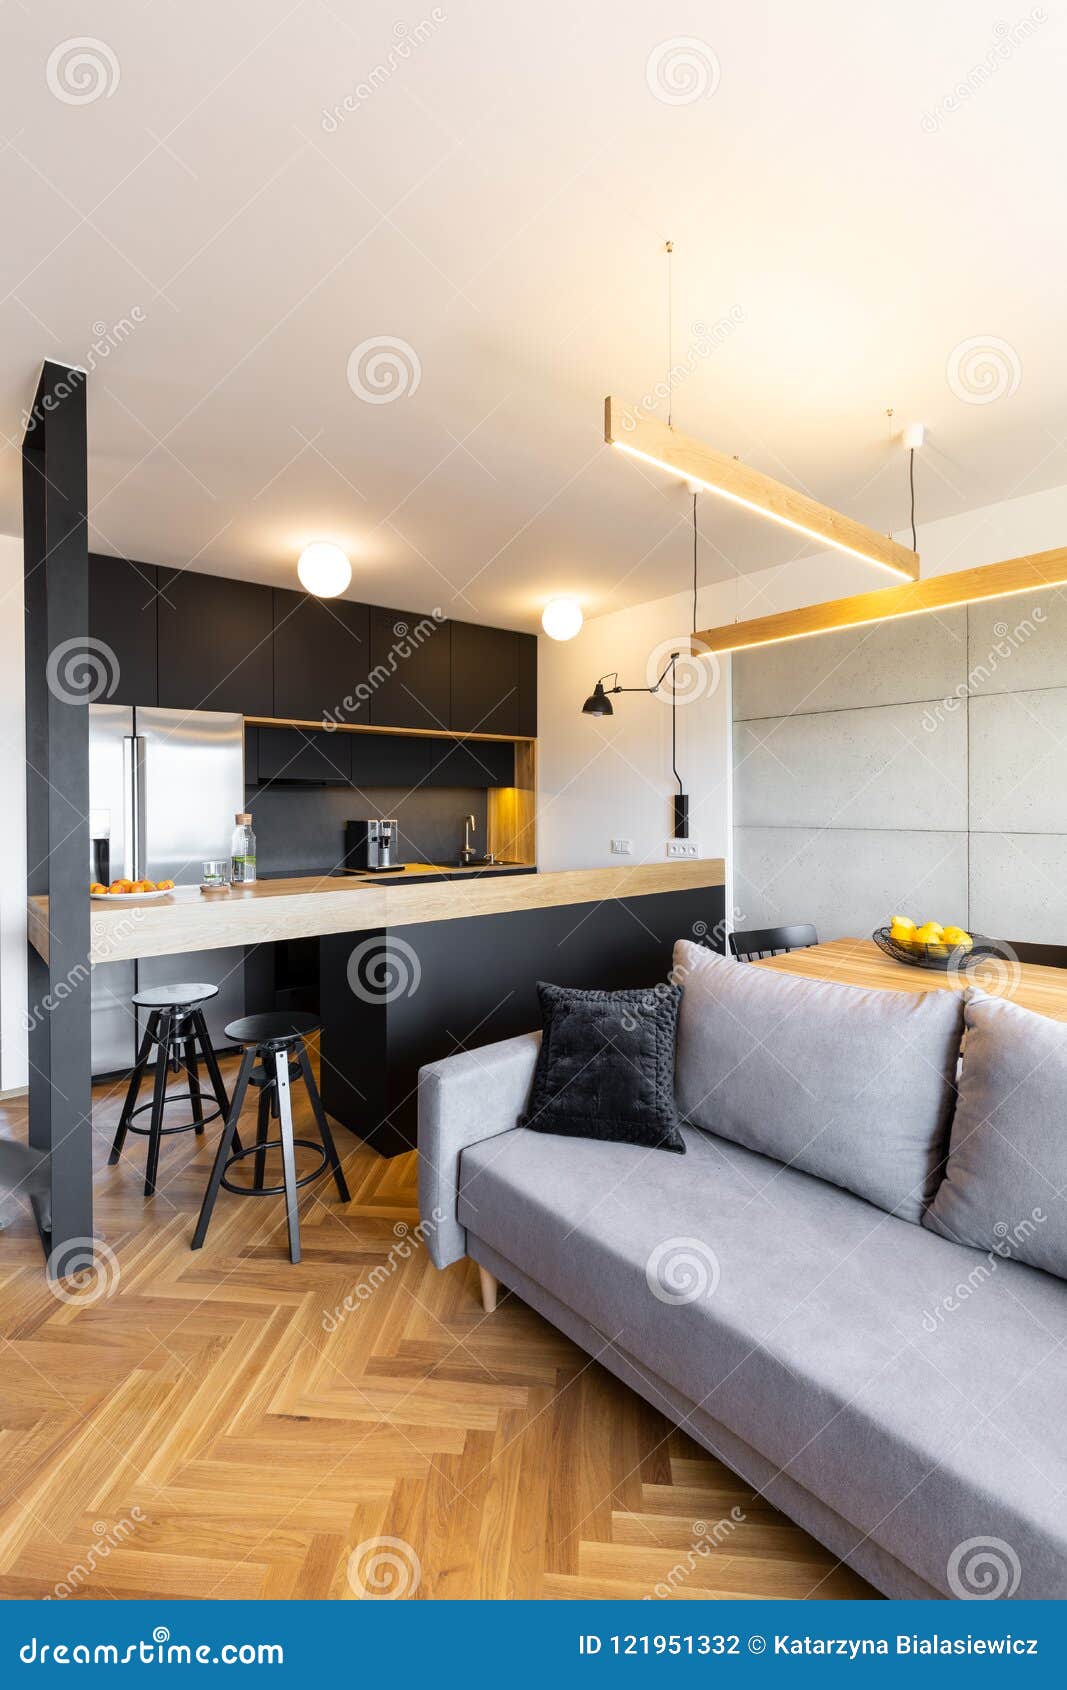 Lights Above Countertop In Black Kitchen Interior With Grey Sofa Stock Photo - Image of black ...